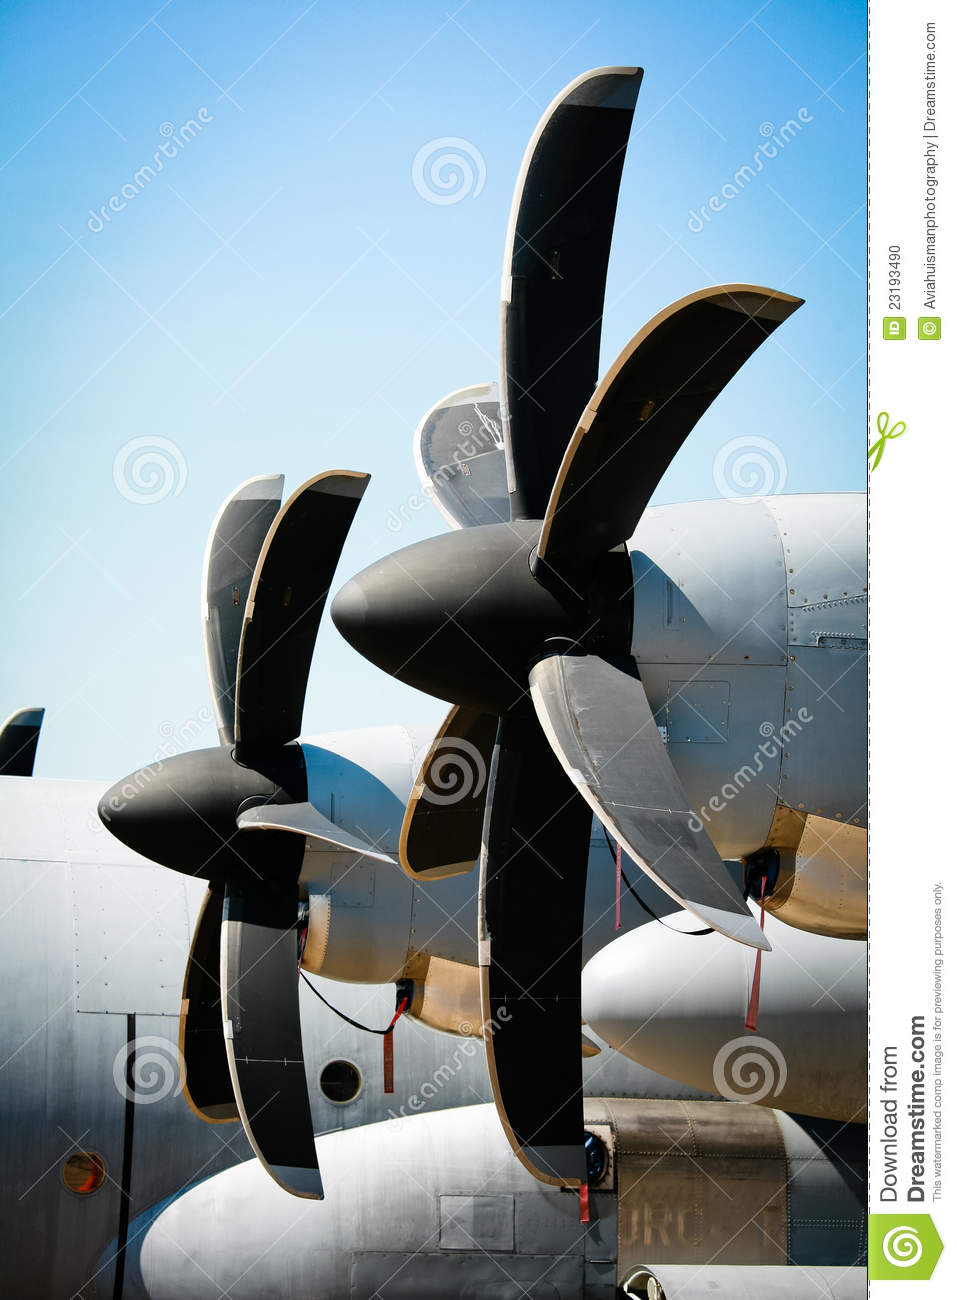 More Similar Stock Images Of   Vintage Propeller Airplane